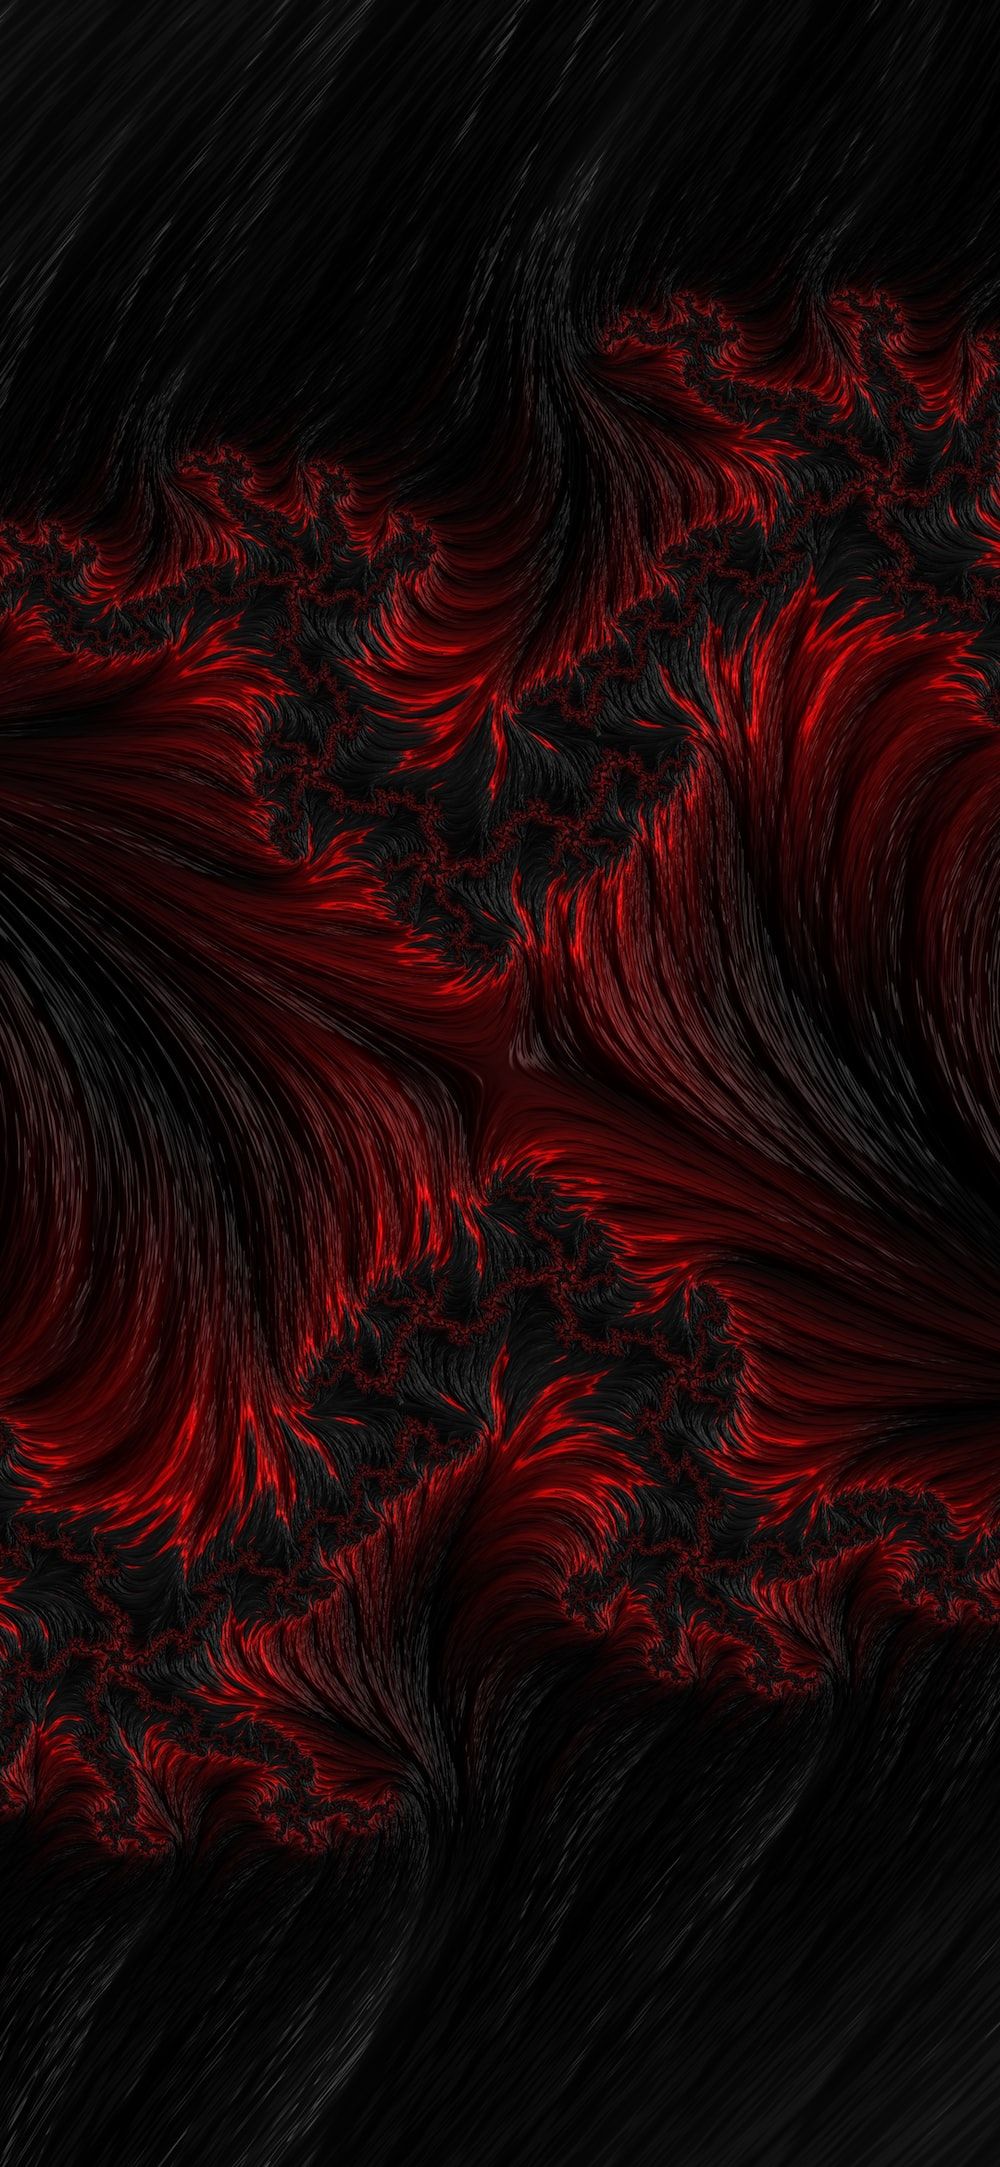 Red and black abstract wallpaper for your iPhone from Vibe app - Dark red